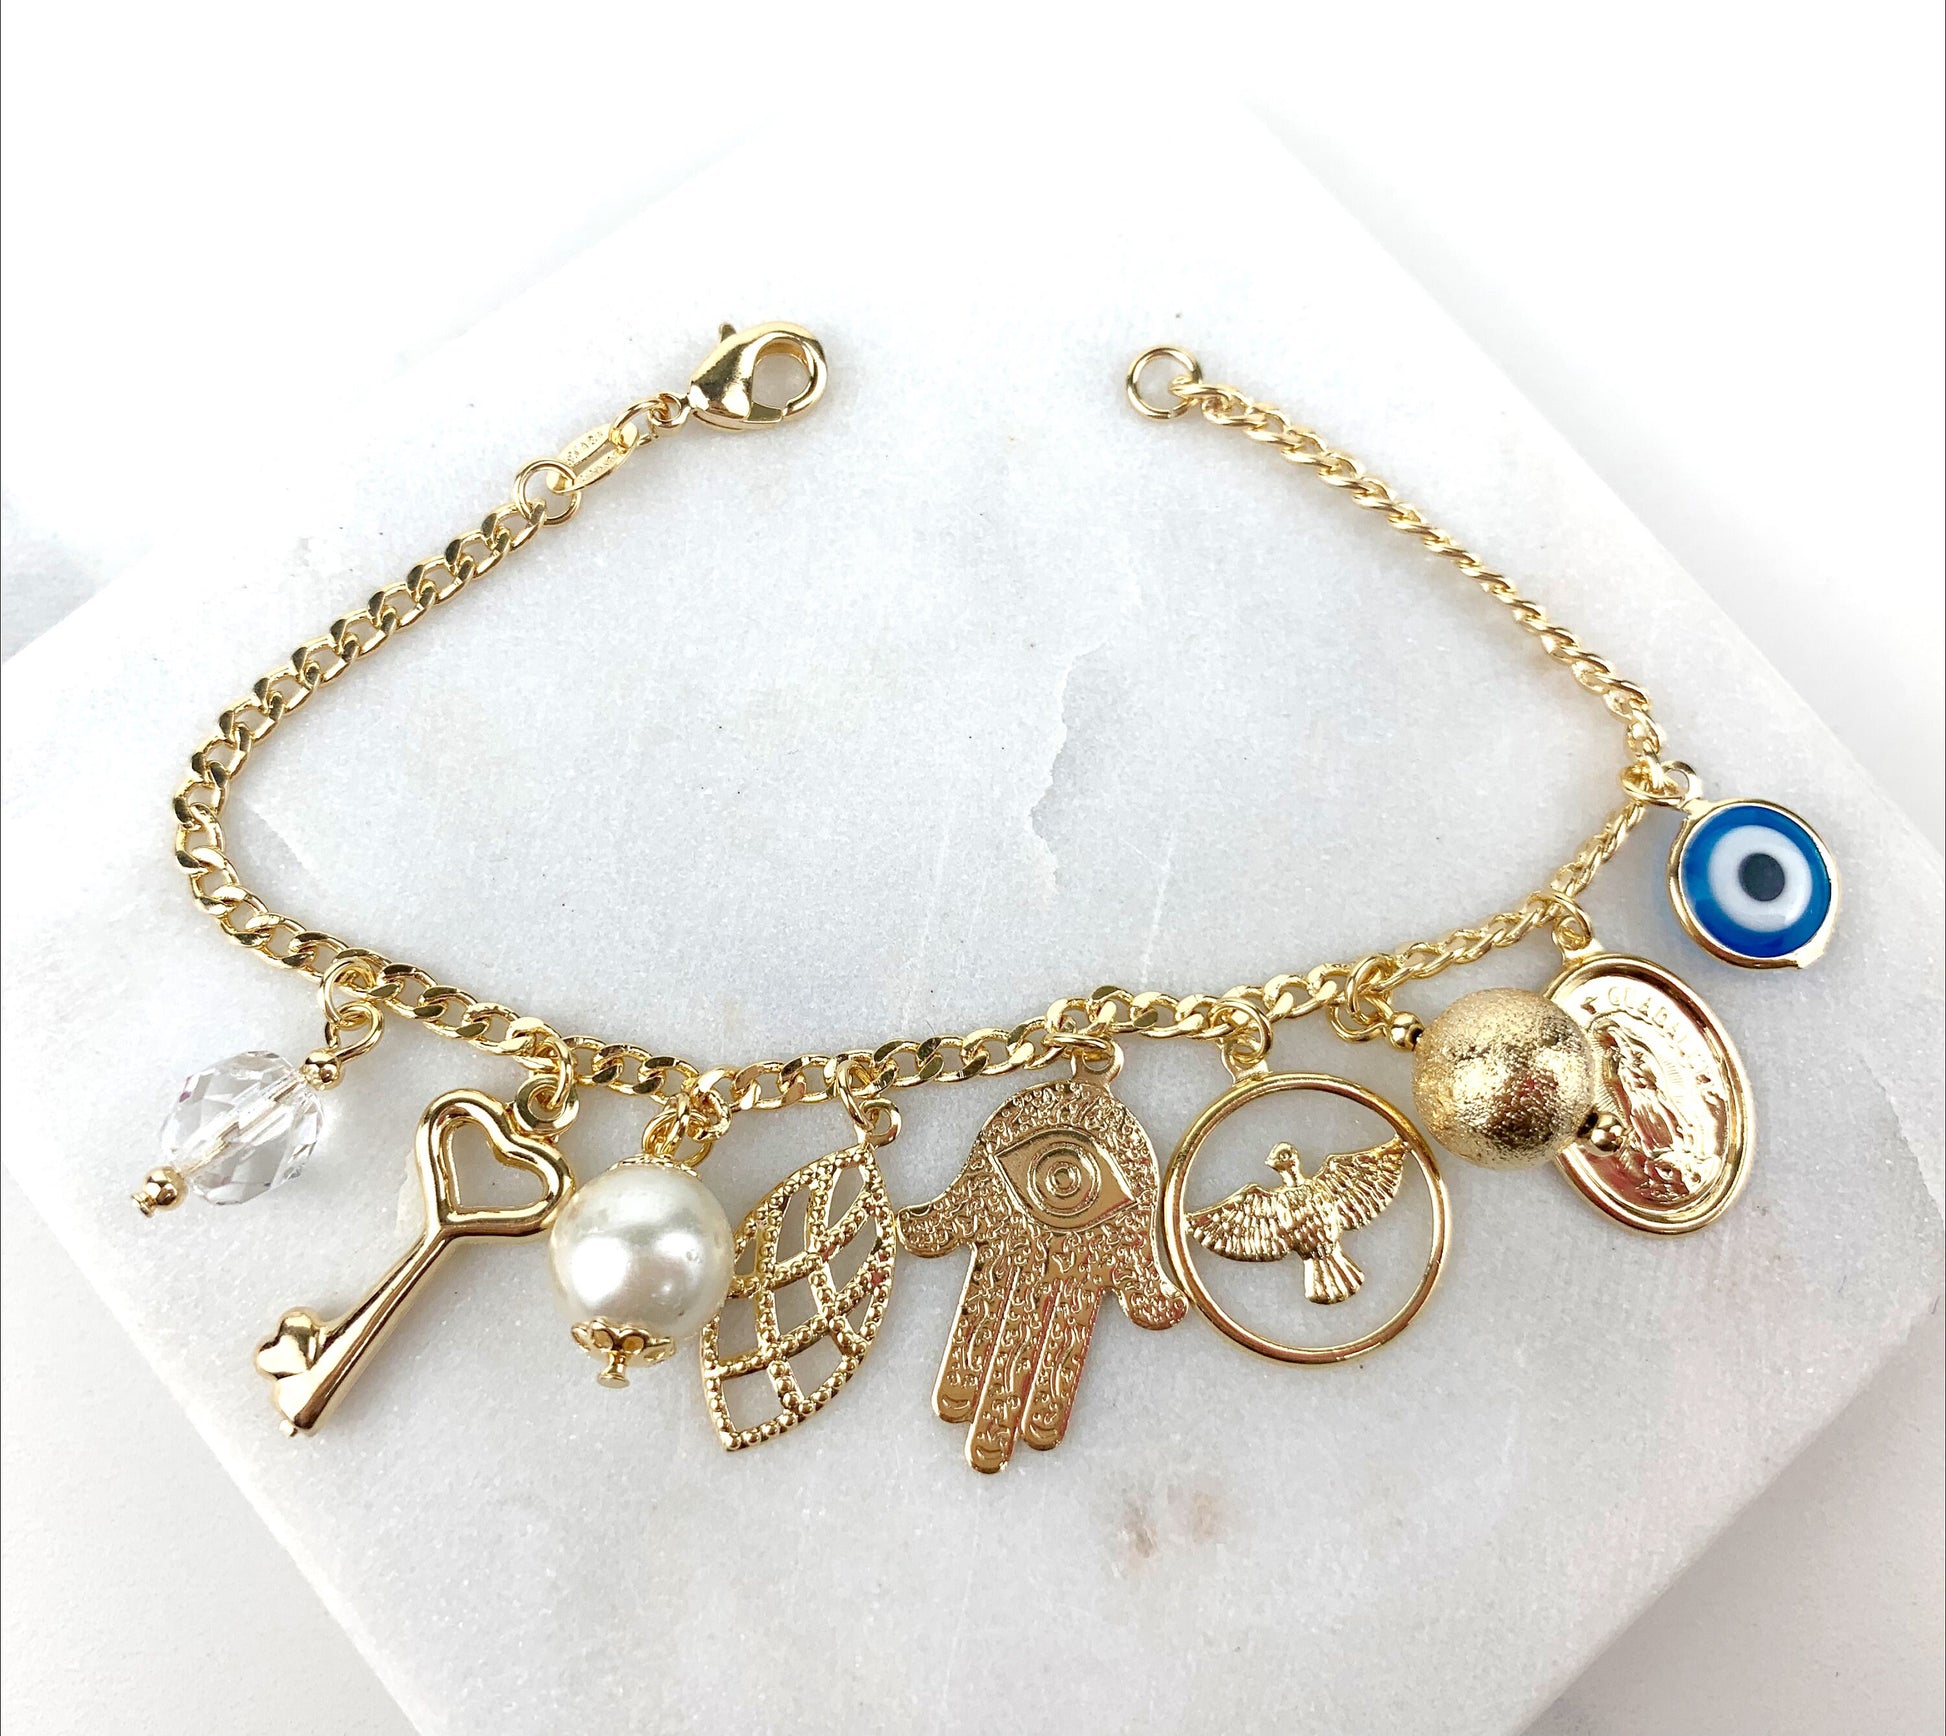 18k Gold Filled Curb Link Chain with Evil Eyes, Hansa Hand, Key, Pearl, Dove, Guadalupe Virgen, Leaf Charms, Bracelet Wholesale Jewelry